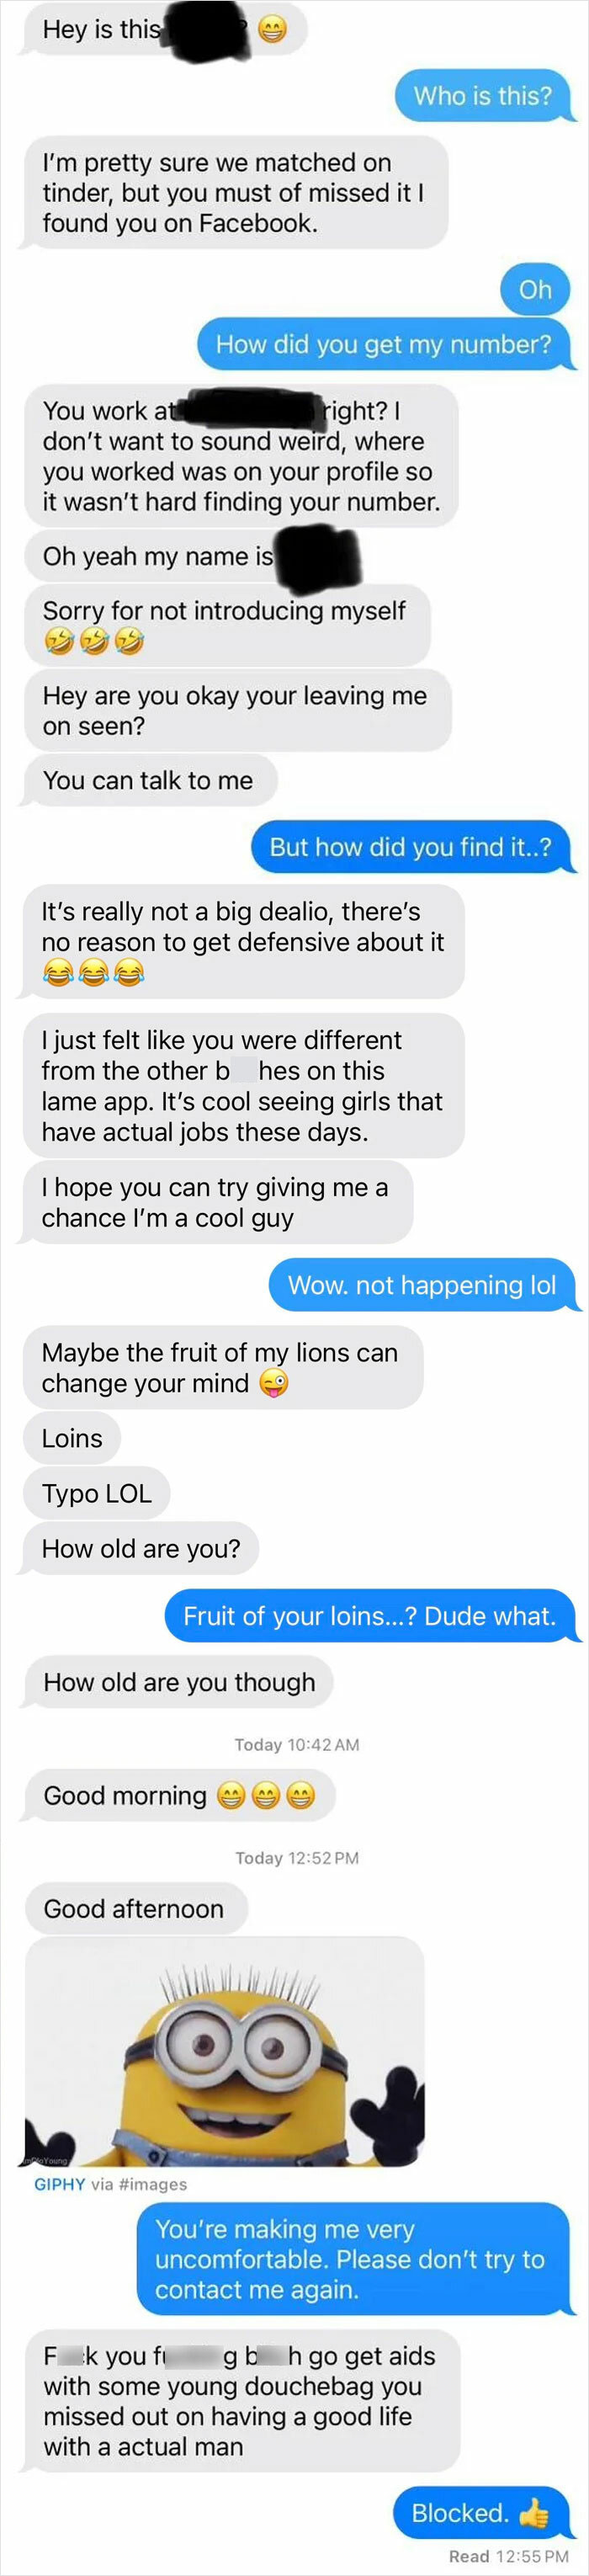 Ngvc: “Fruit Of My Lions”